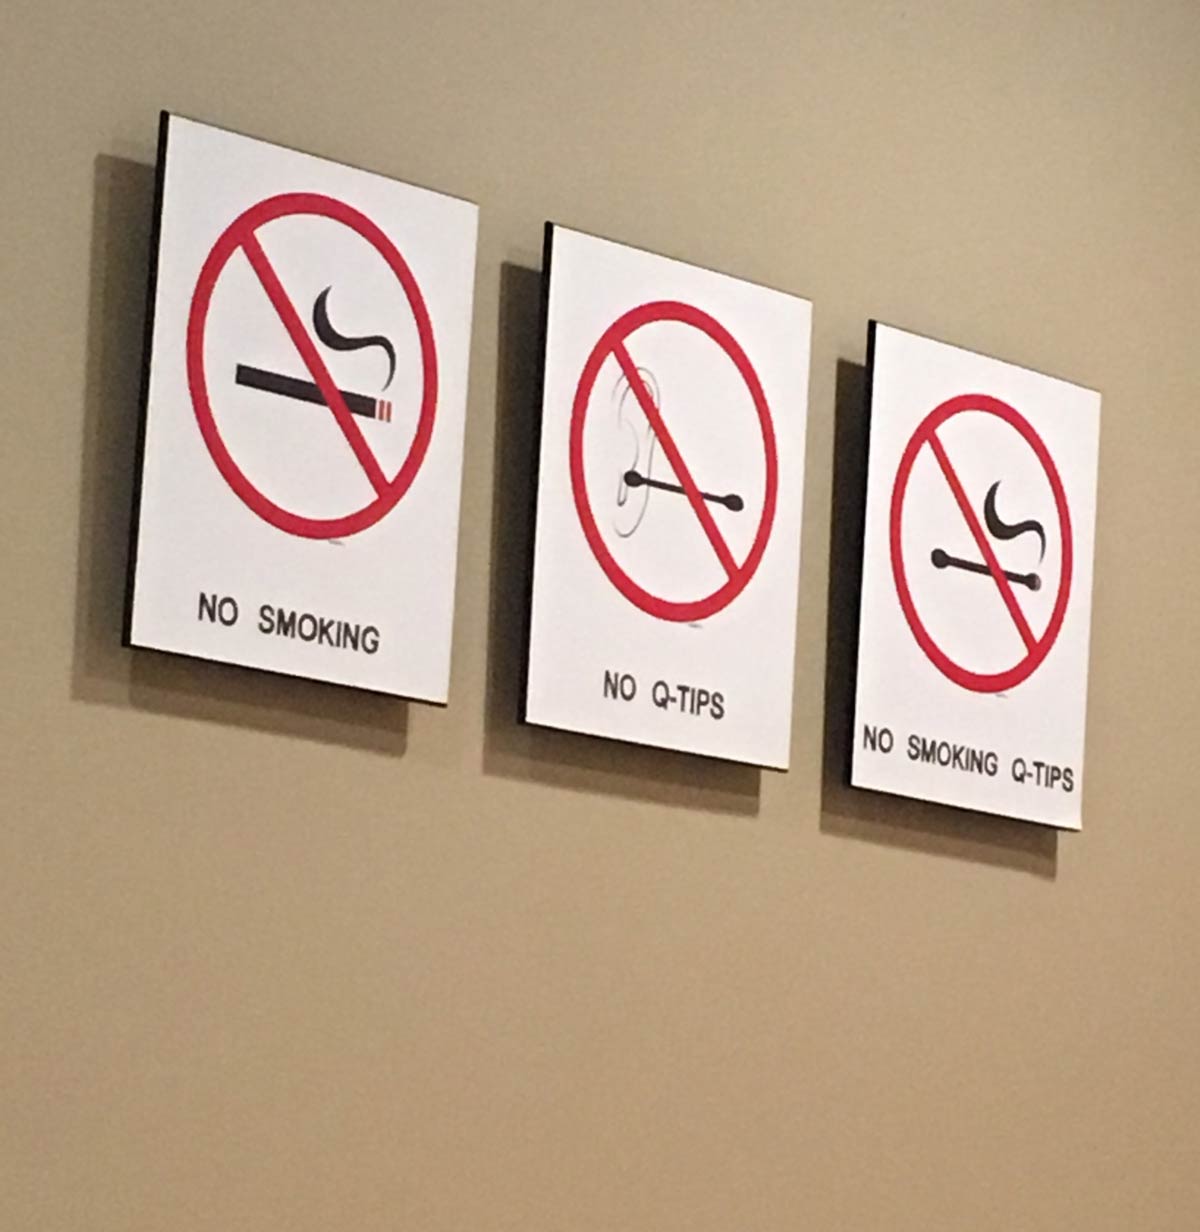 Sign found at the Throat, Nose, and Ear specialist's office